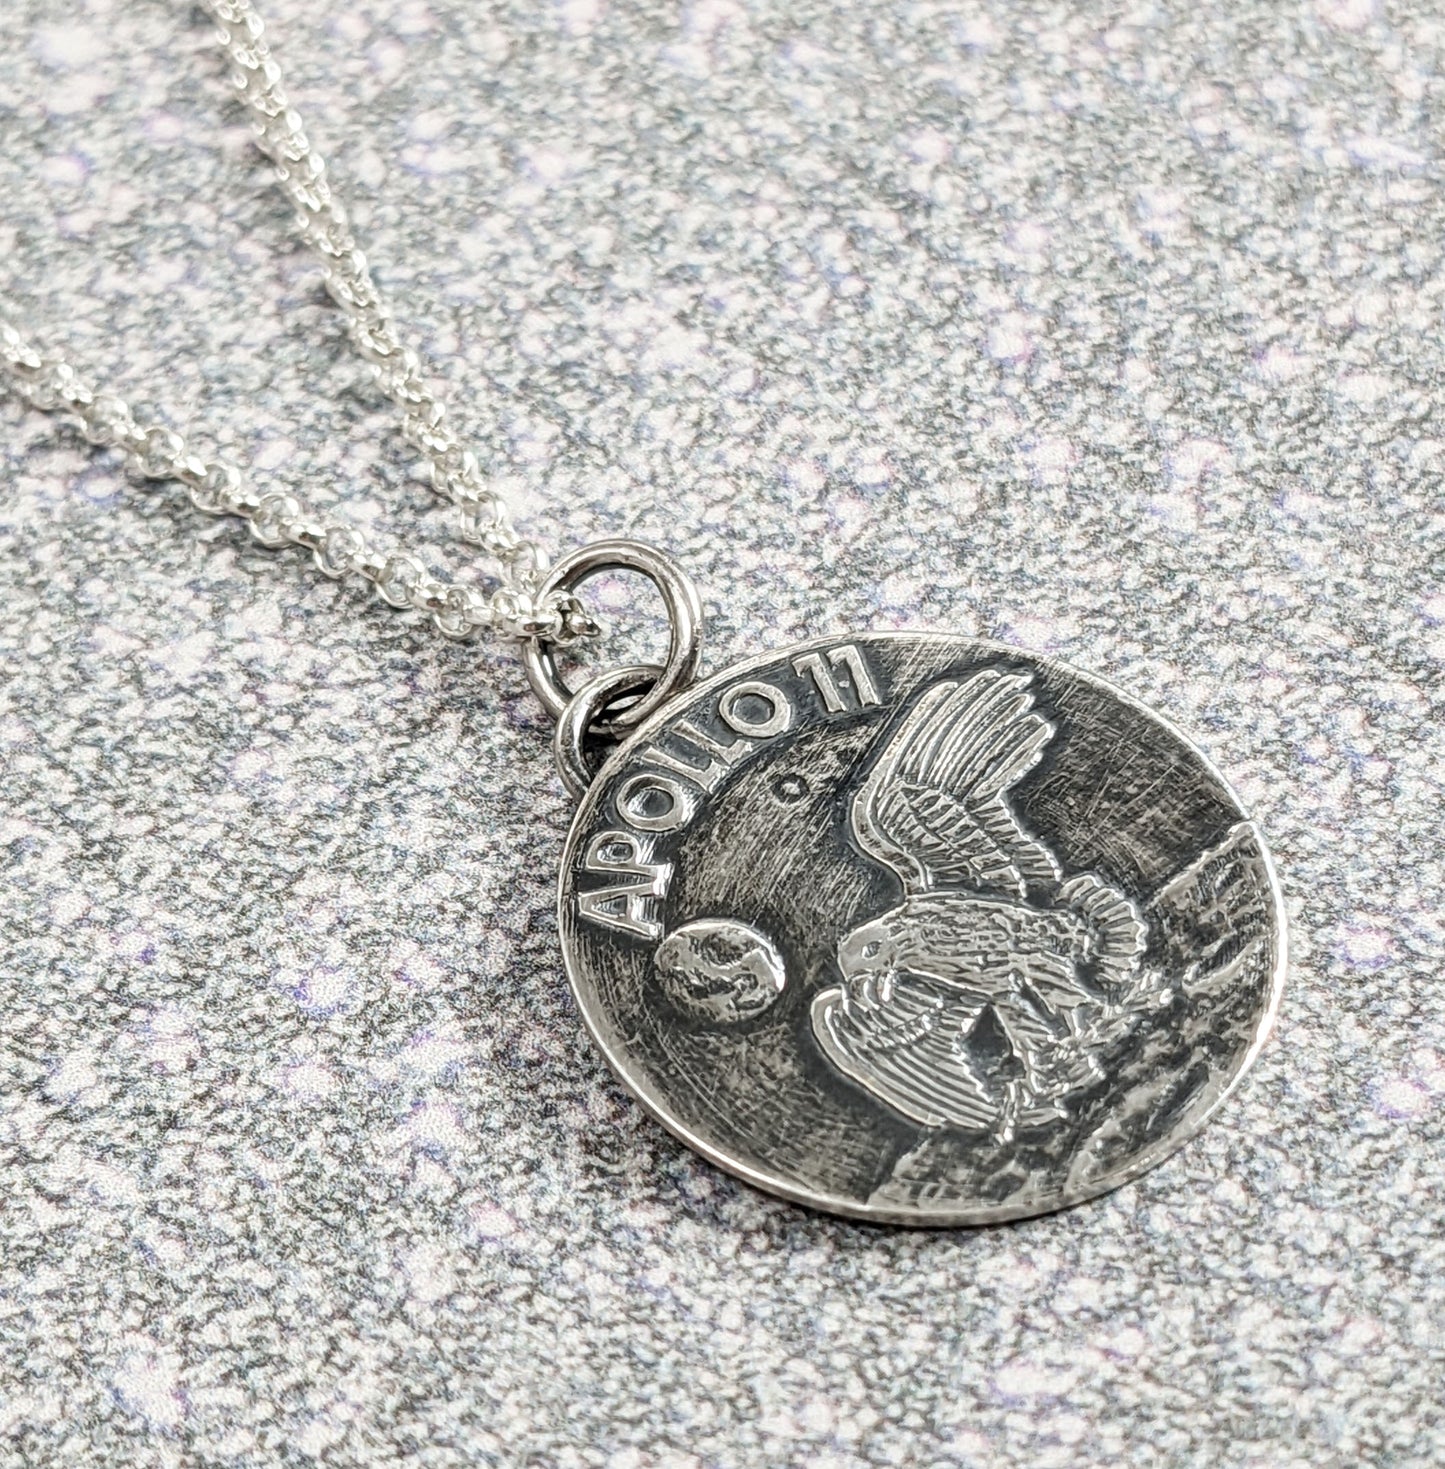 Handmade sterling silver pendant necklace signifying the landing of lunar module Eagle on the moon. The words Apollo 11 are in the background above the earth, and an eagle is approaching the moon surface.